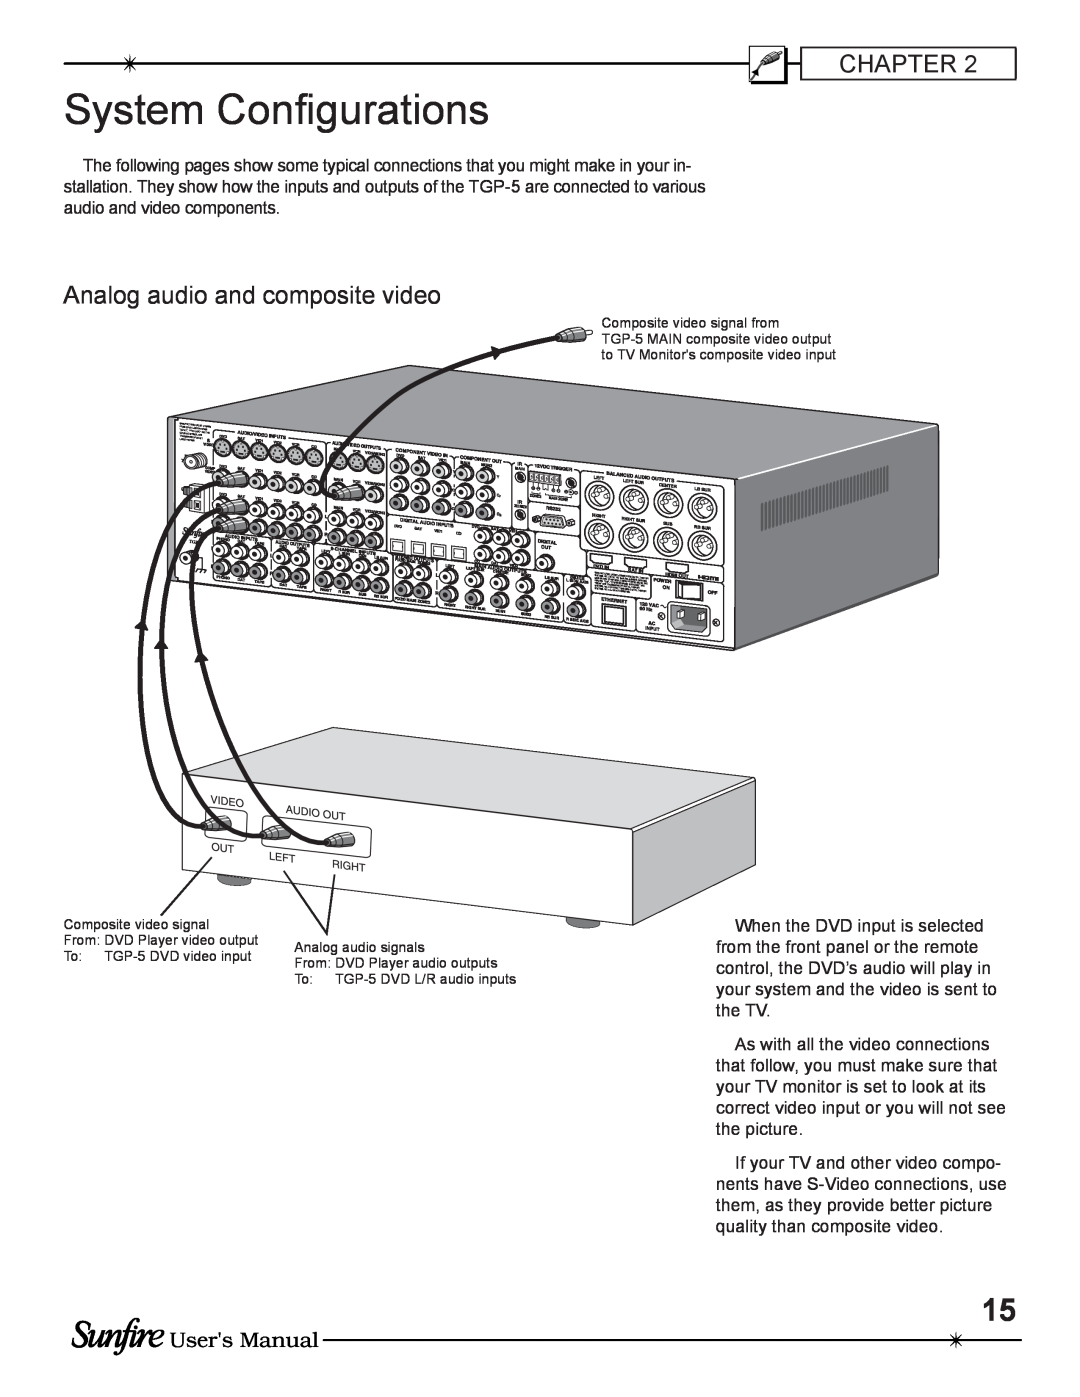 Sunfire TGP-5(E) manual System Conﬁgurations, Chapter, Analog audio and composite video, Users Manual 